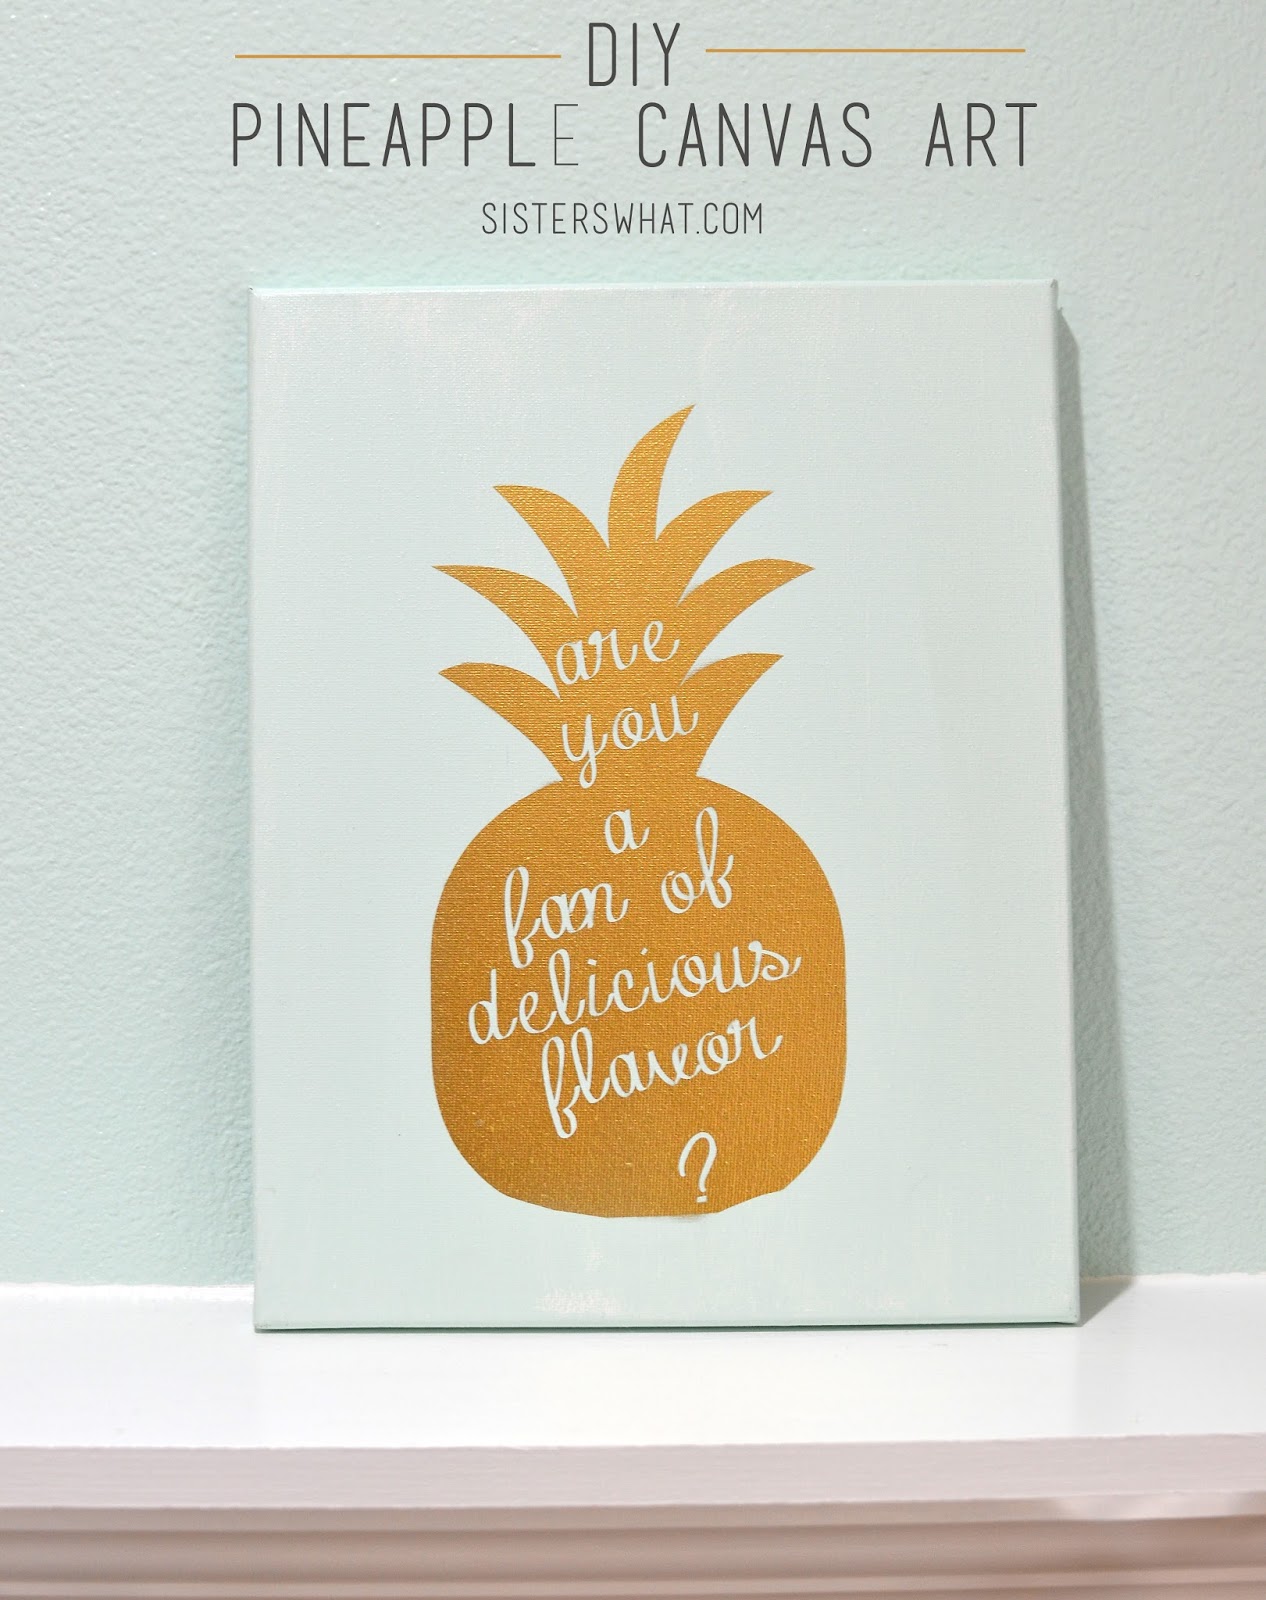 are you a fan of delicious flavor? diy pineapple canvas art